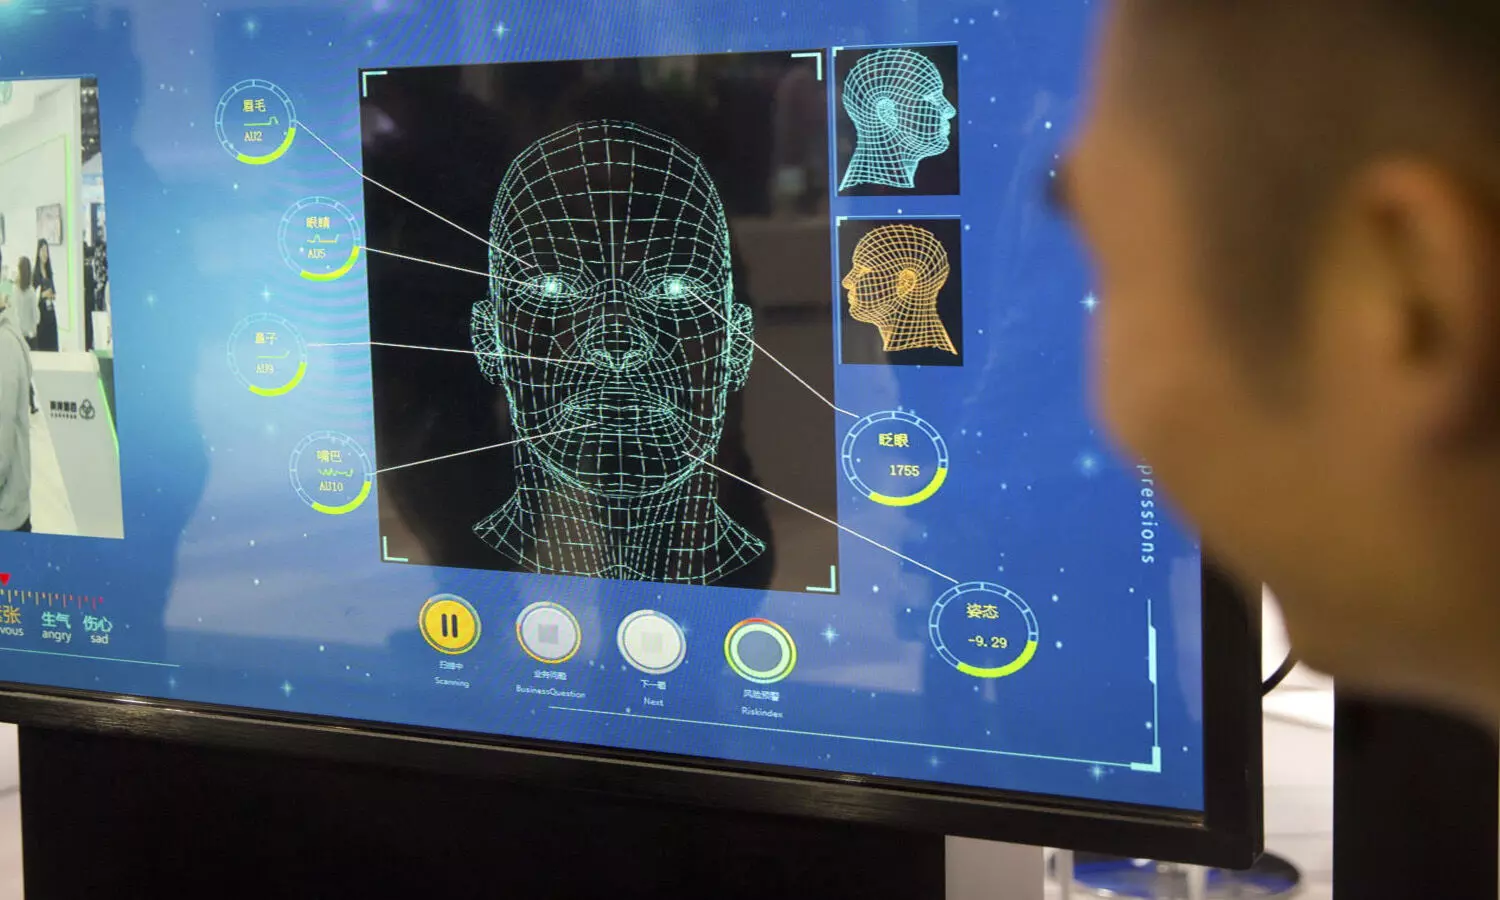 Millions of Retirees Will Profit From This One-Of-A-Kind Face Recognition Technology